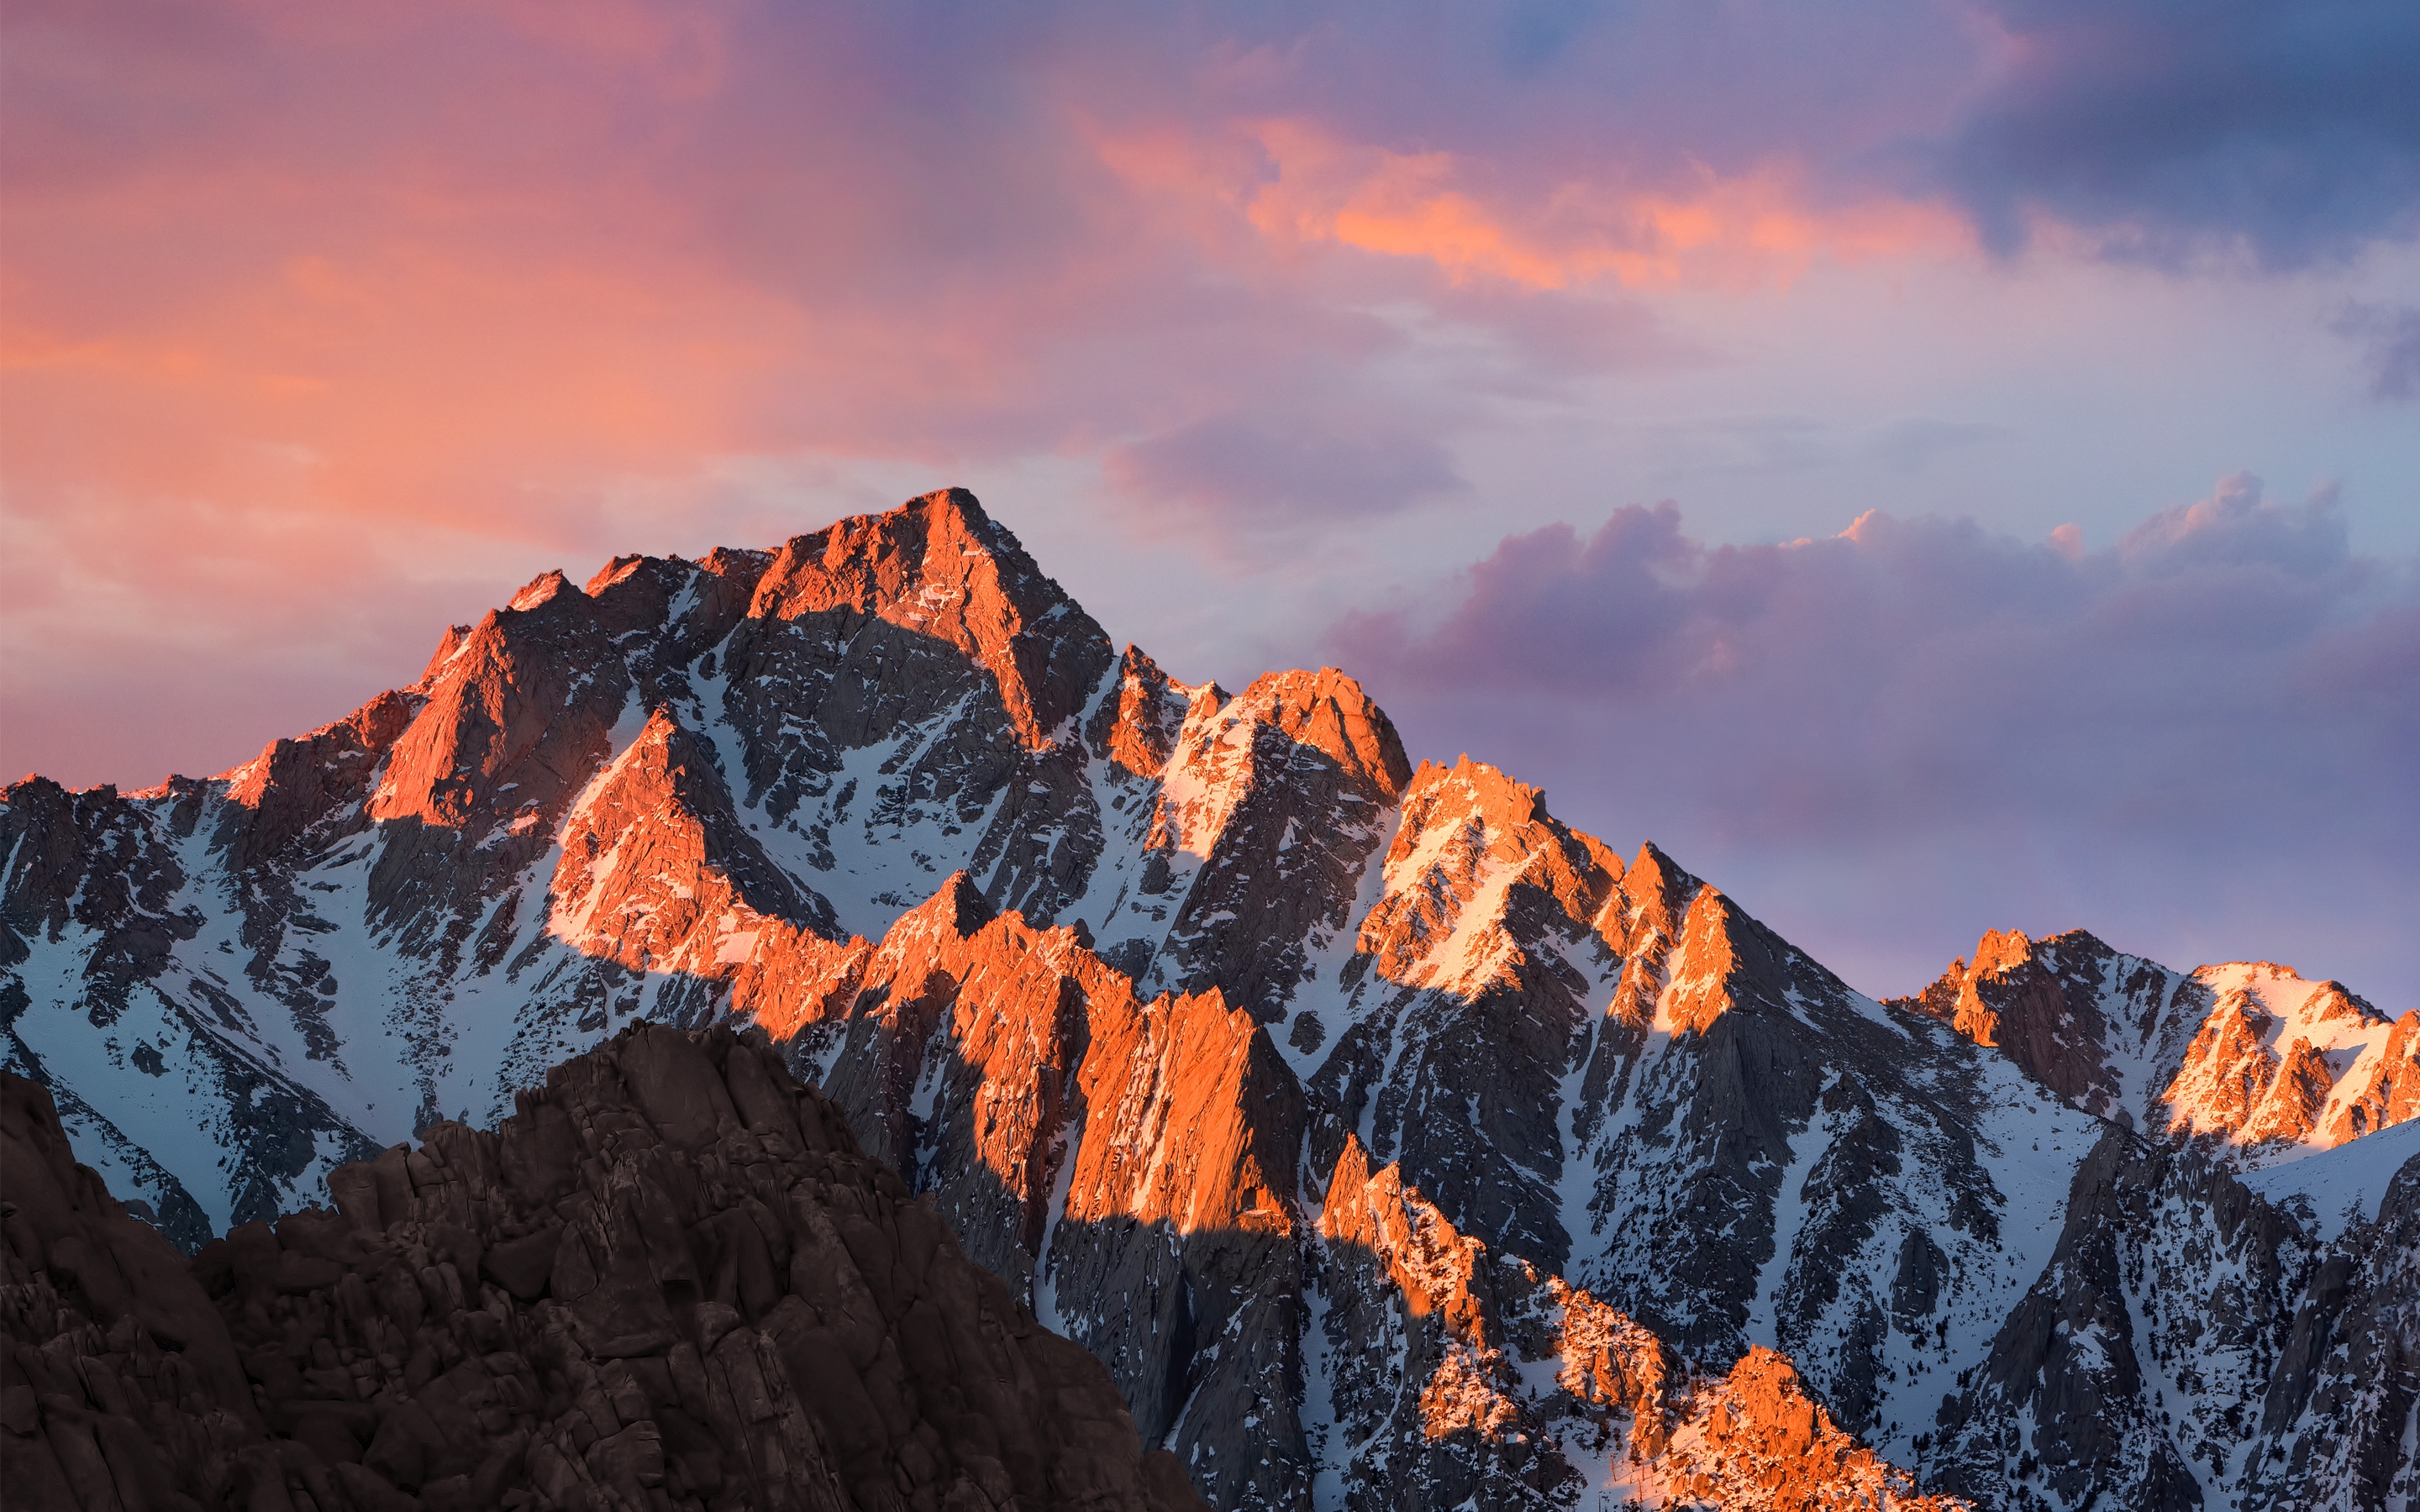 The New Macos Sierra Wallpaper For iPhone iPad And Desktop